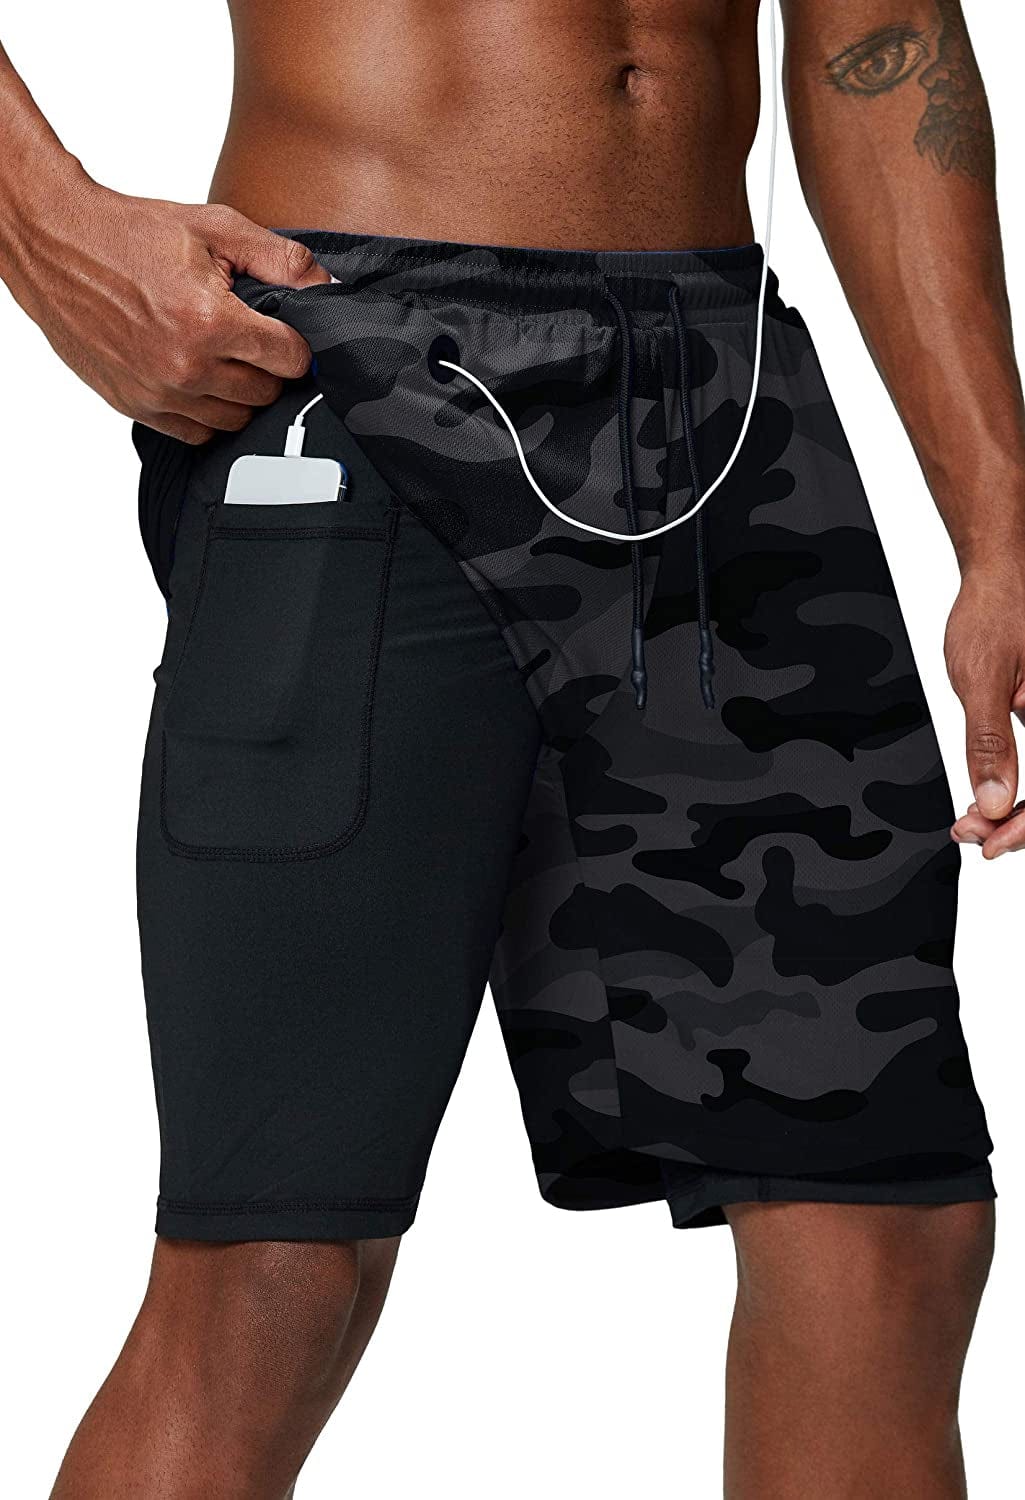 Pinkbomb Men'S 2 in 1 Running Shorts Gym Workout Quick Dry Mens Shorts with Phone Pocket